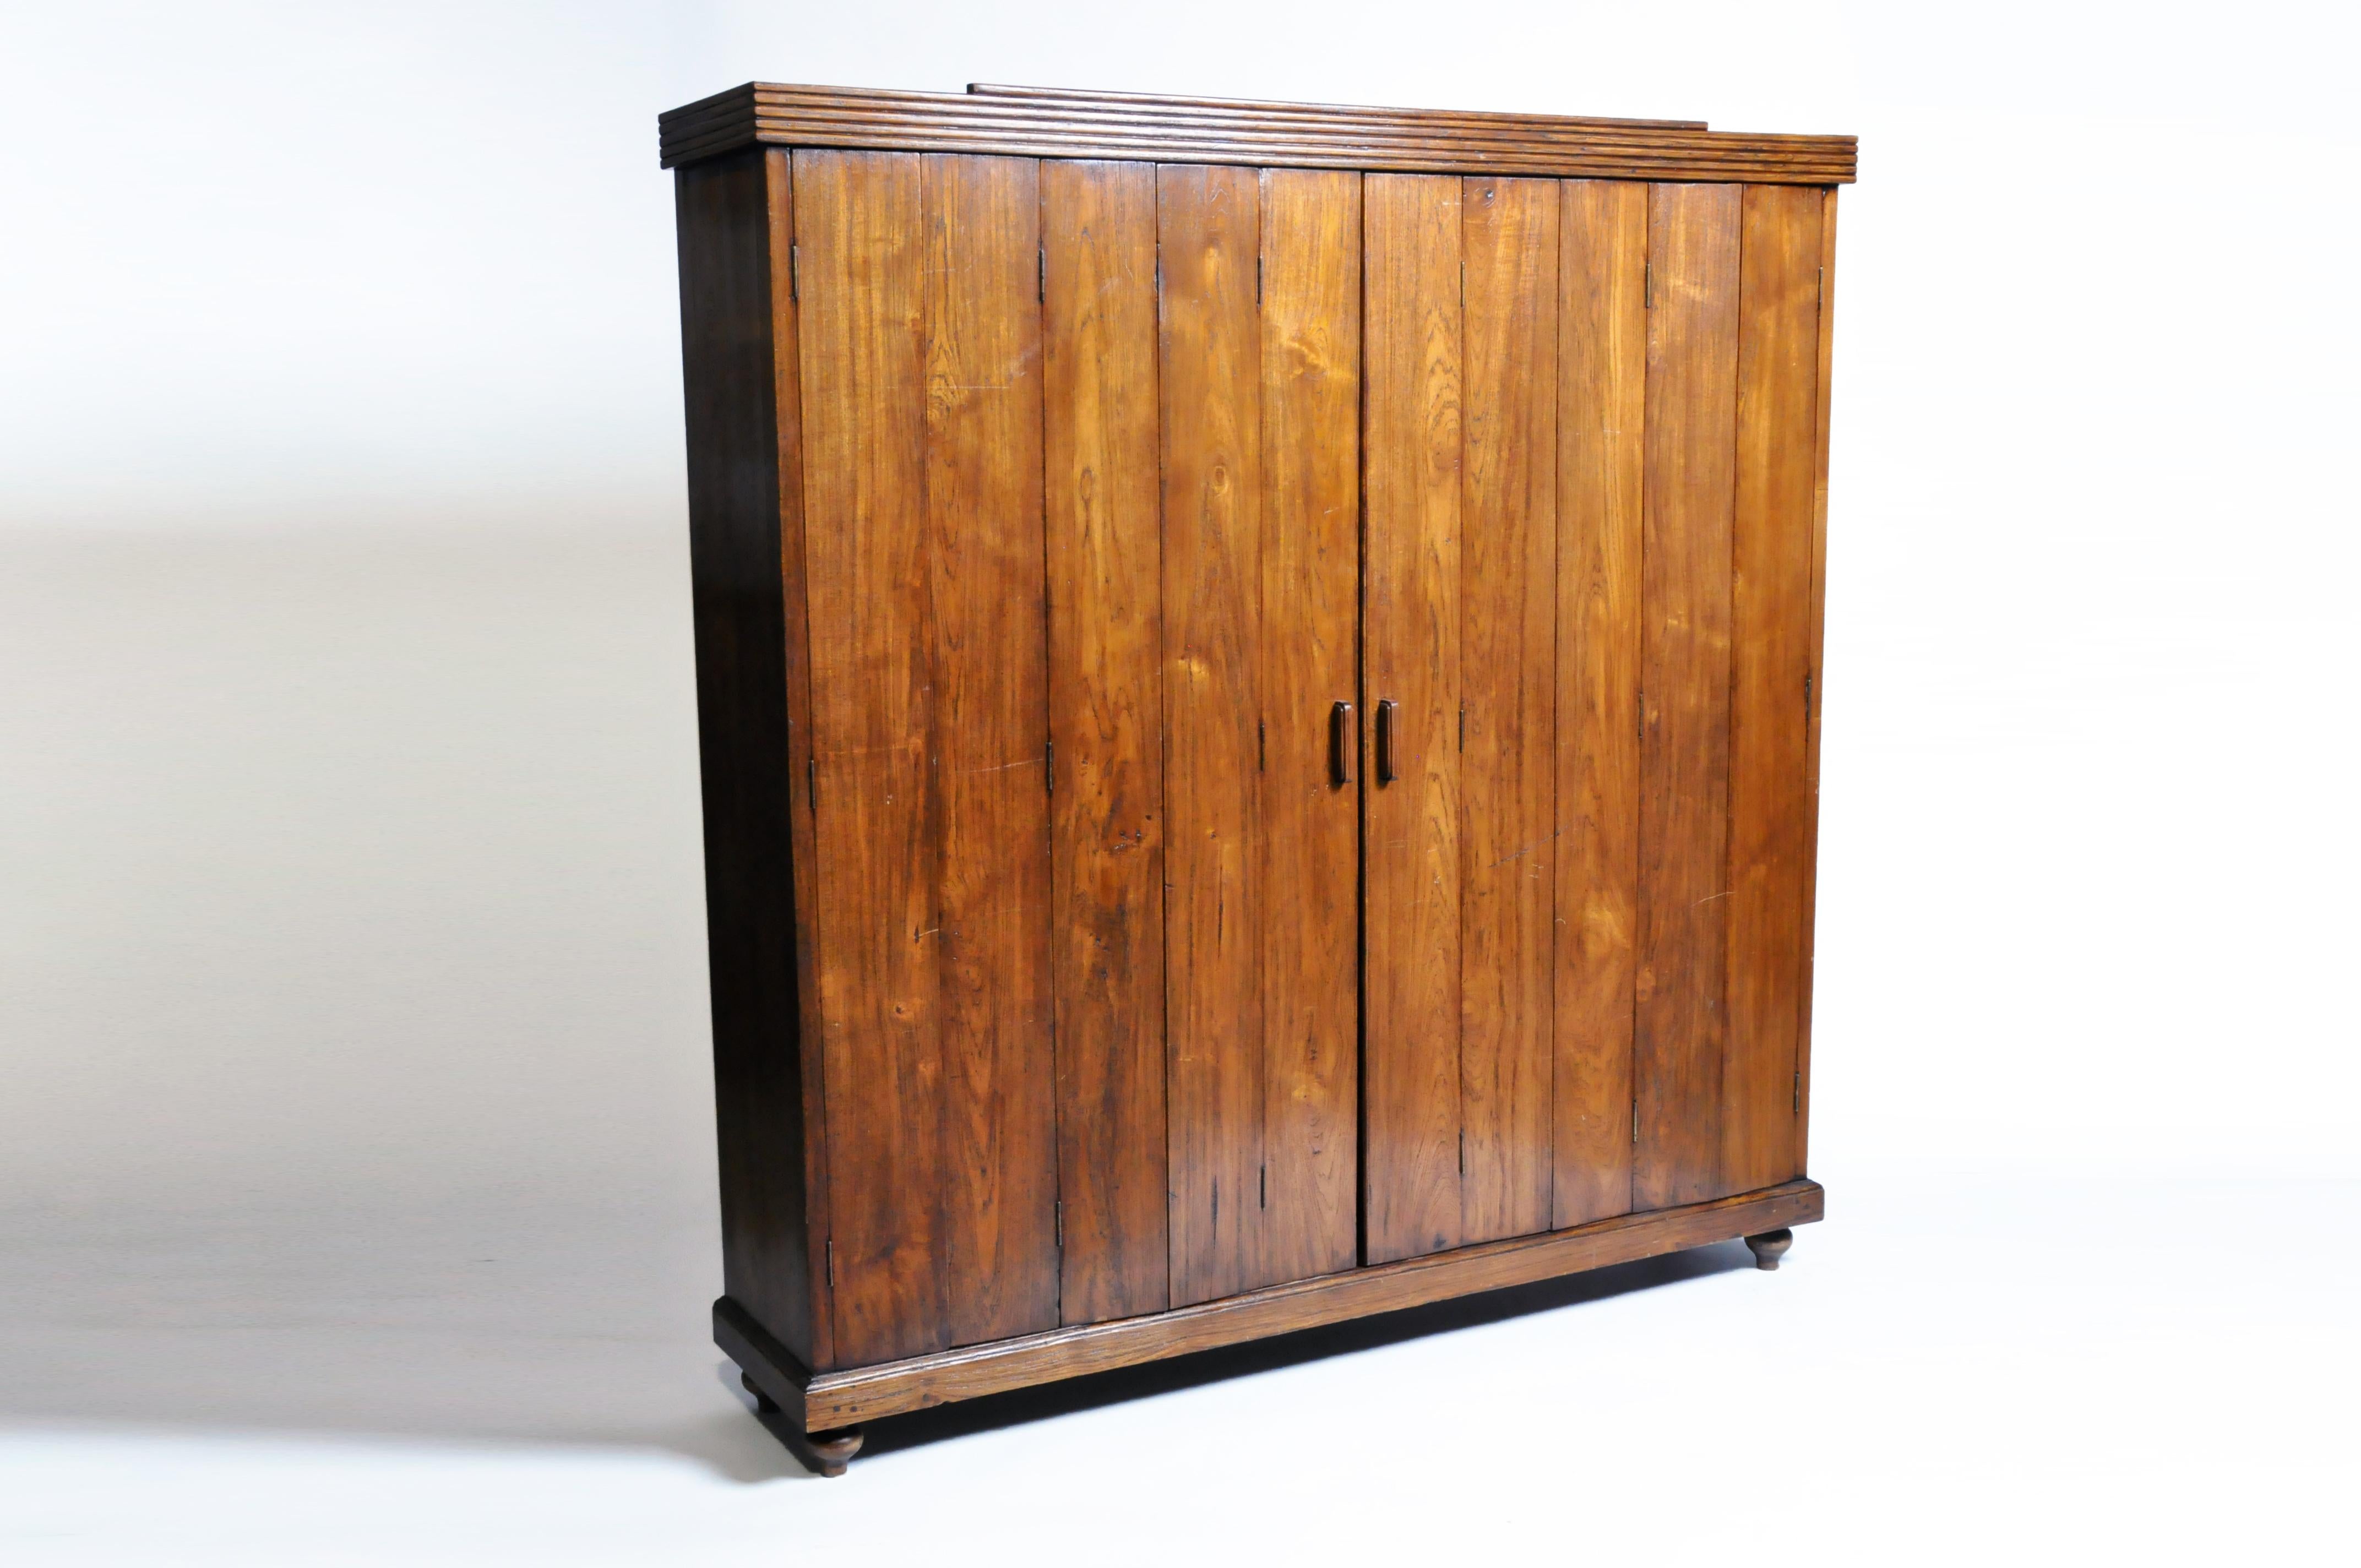 This handsome Art Deco cabinet is from Burma and was made from teak wood, circa 1940. This piece features three shelves and a pair of five-panel folding doors.